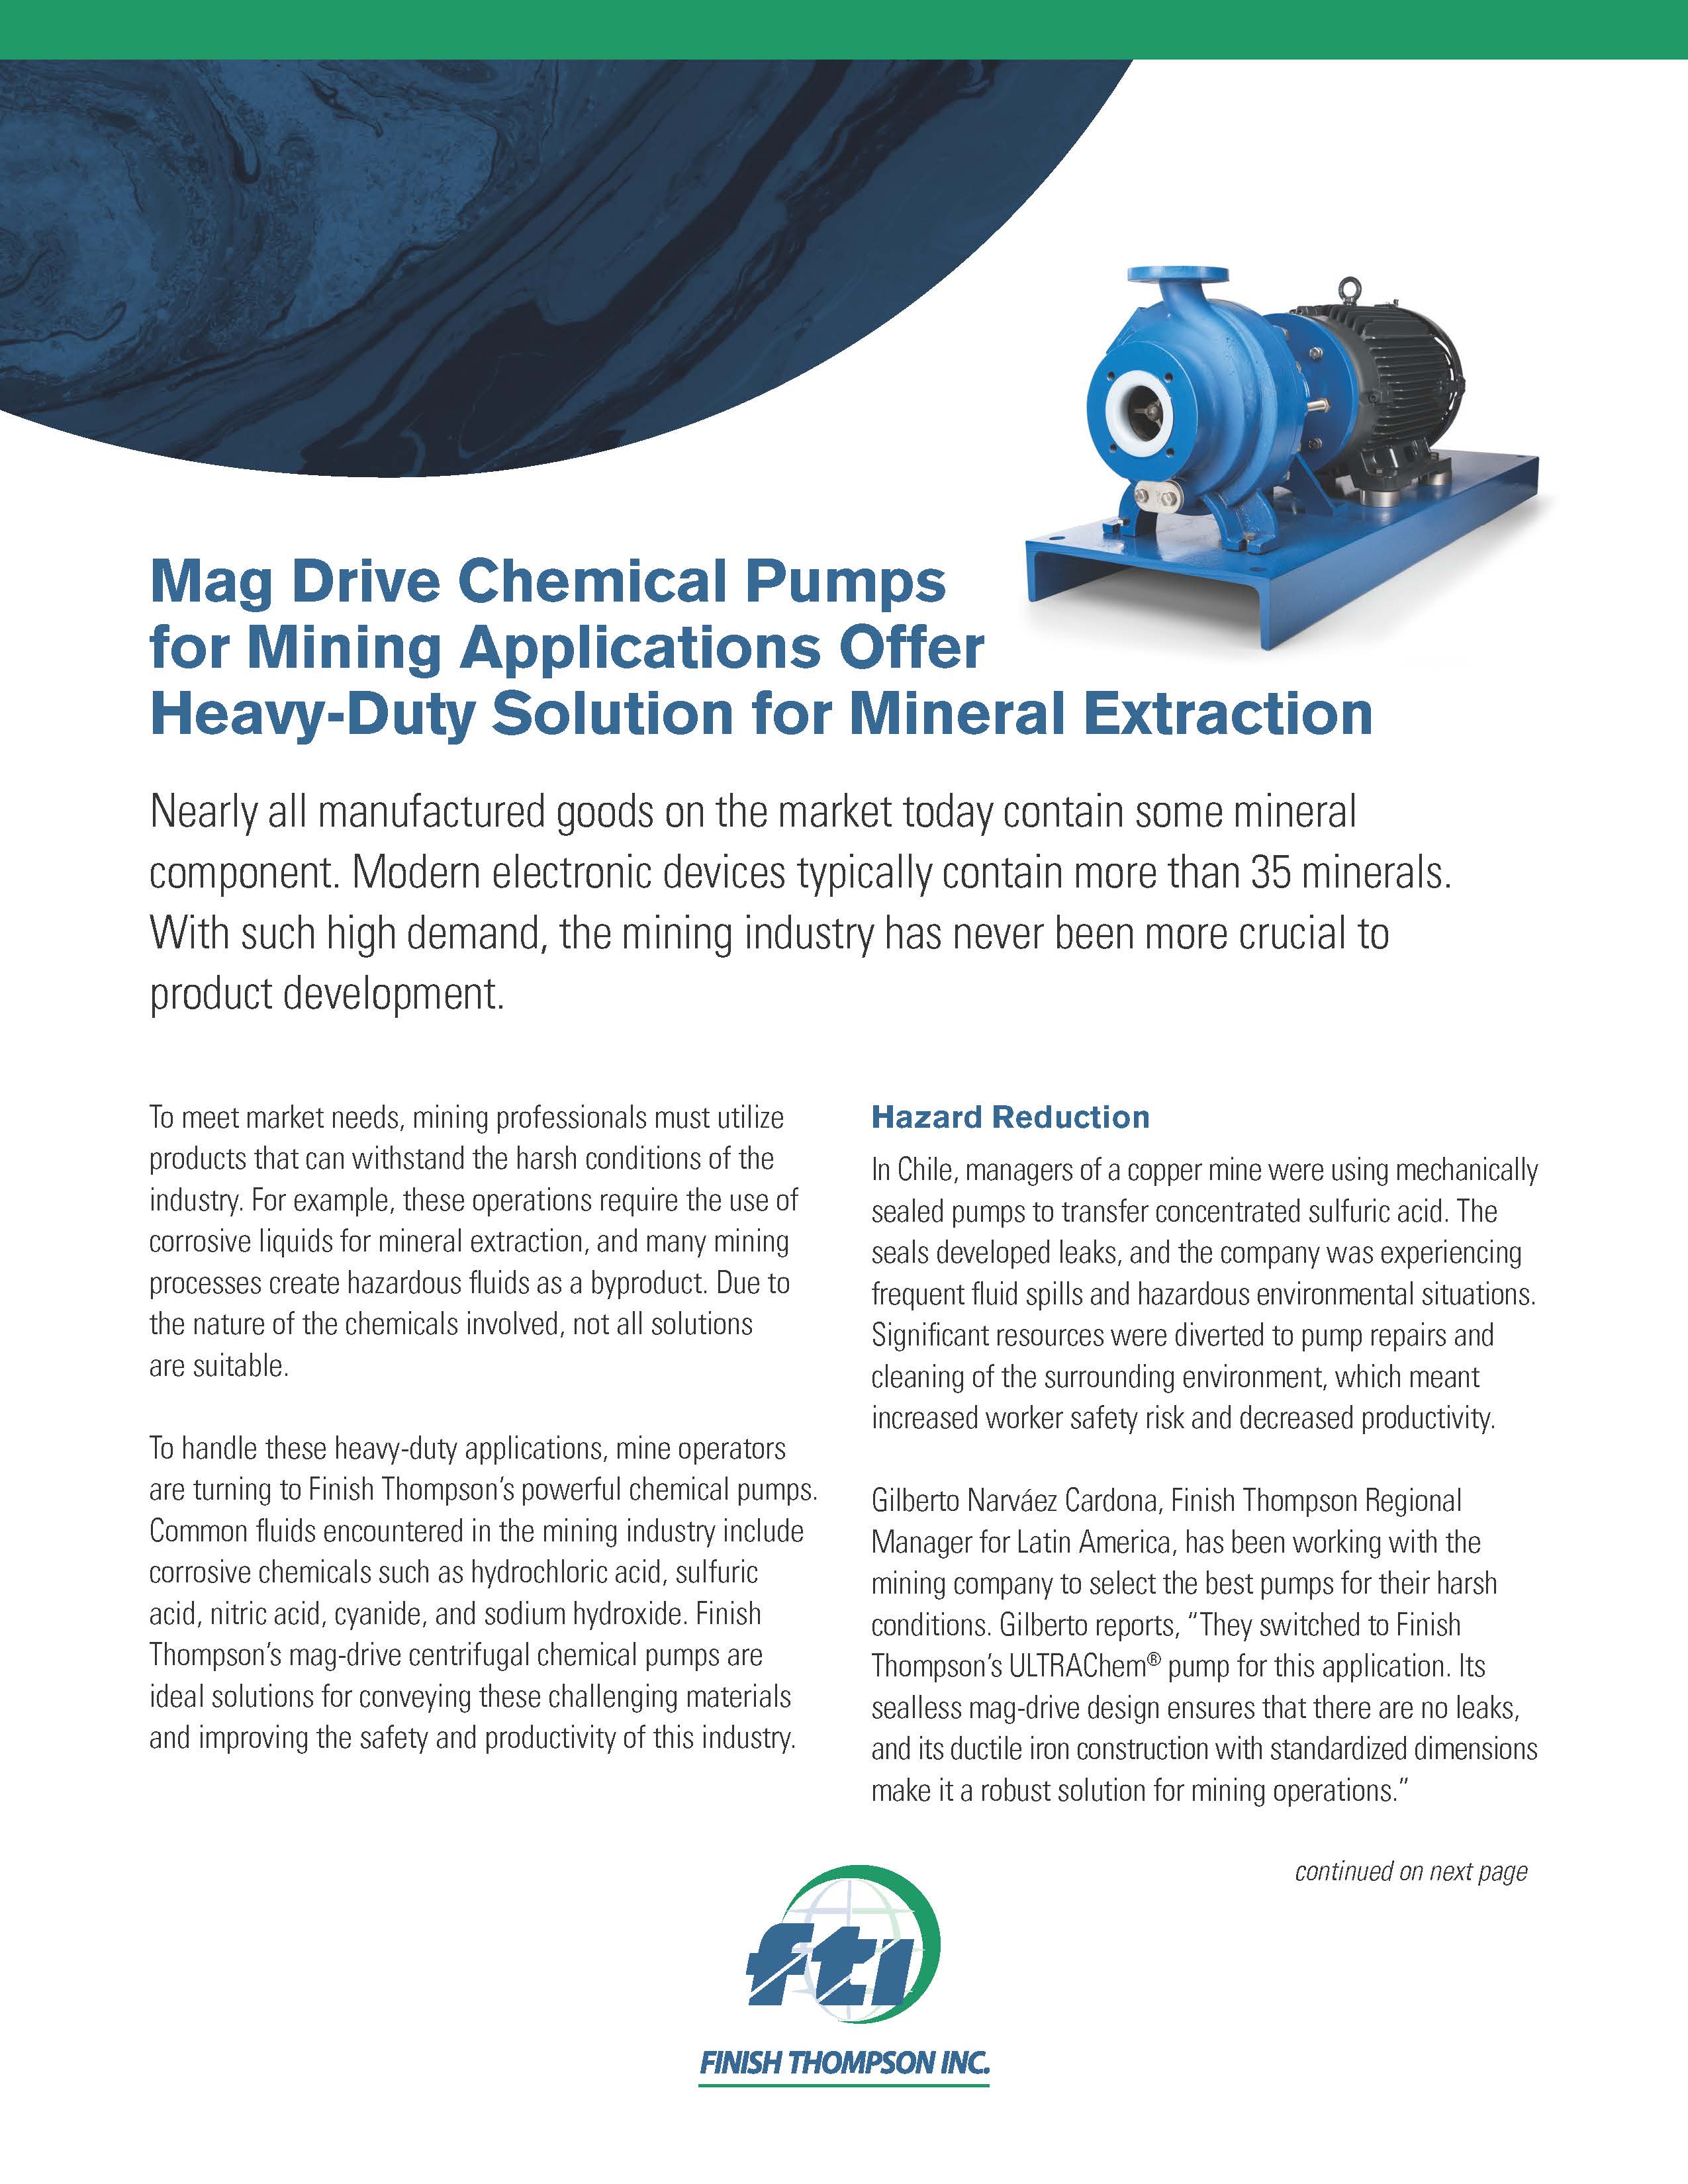 Finish Thompson Mag Drive Chemical Pumps for Mining Applications Offer Heavy-Duty Solution for Mineral Extraction